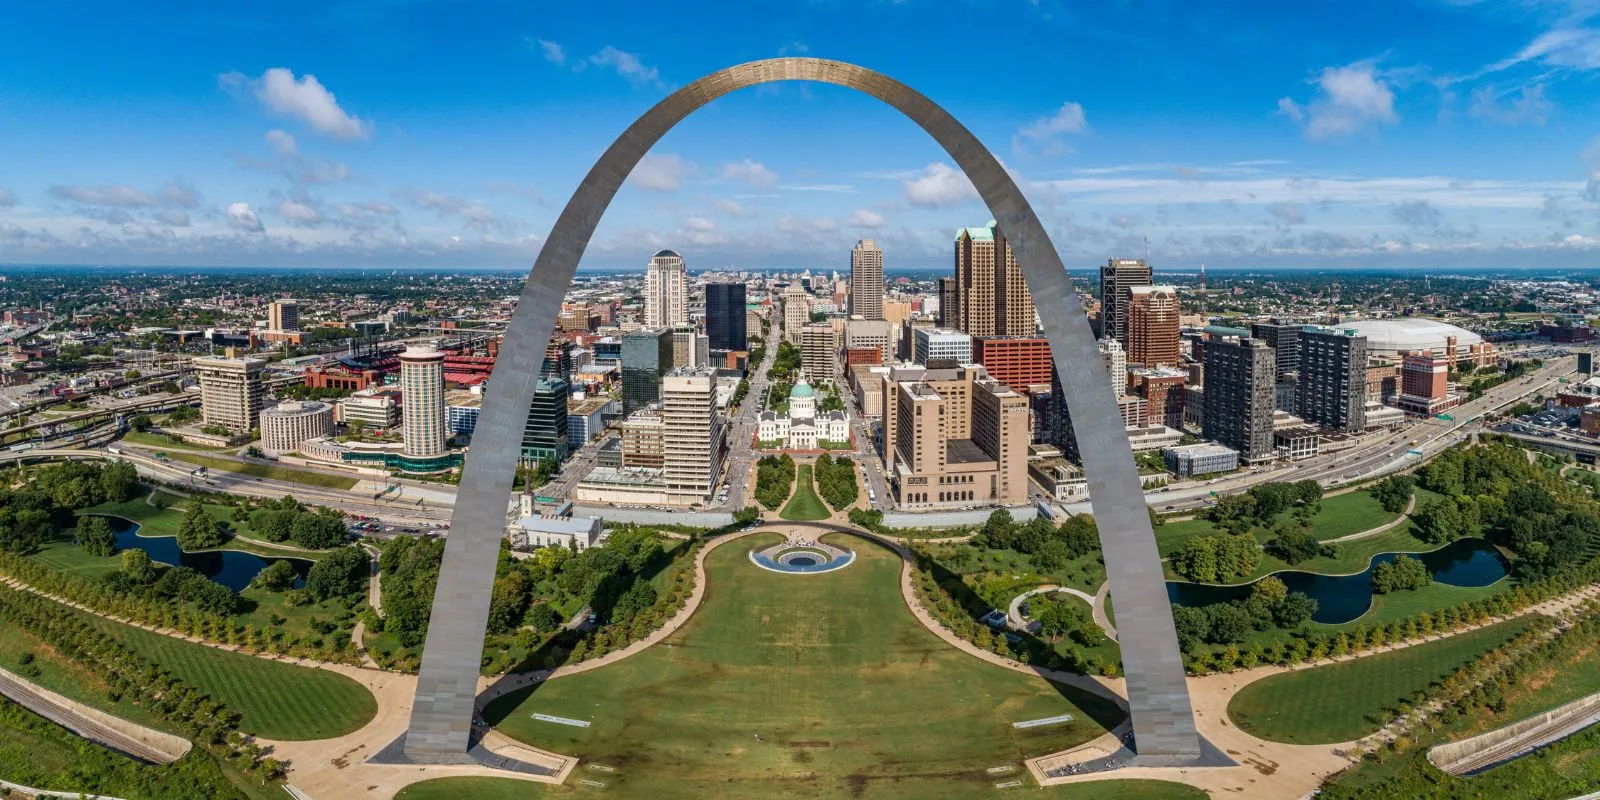 St. Louis, Missouri has been identified as the most depressed city